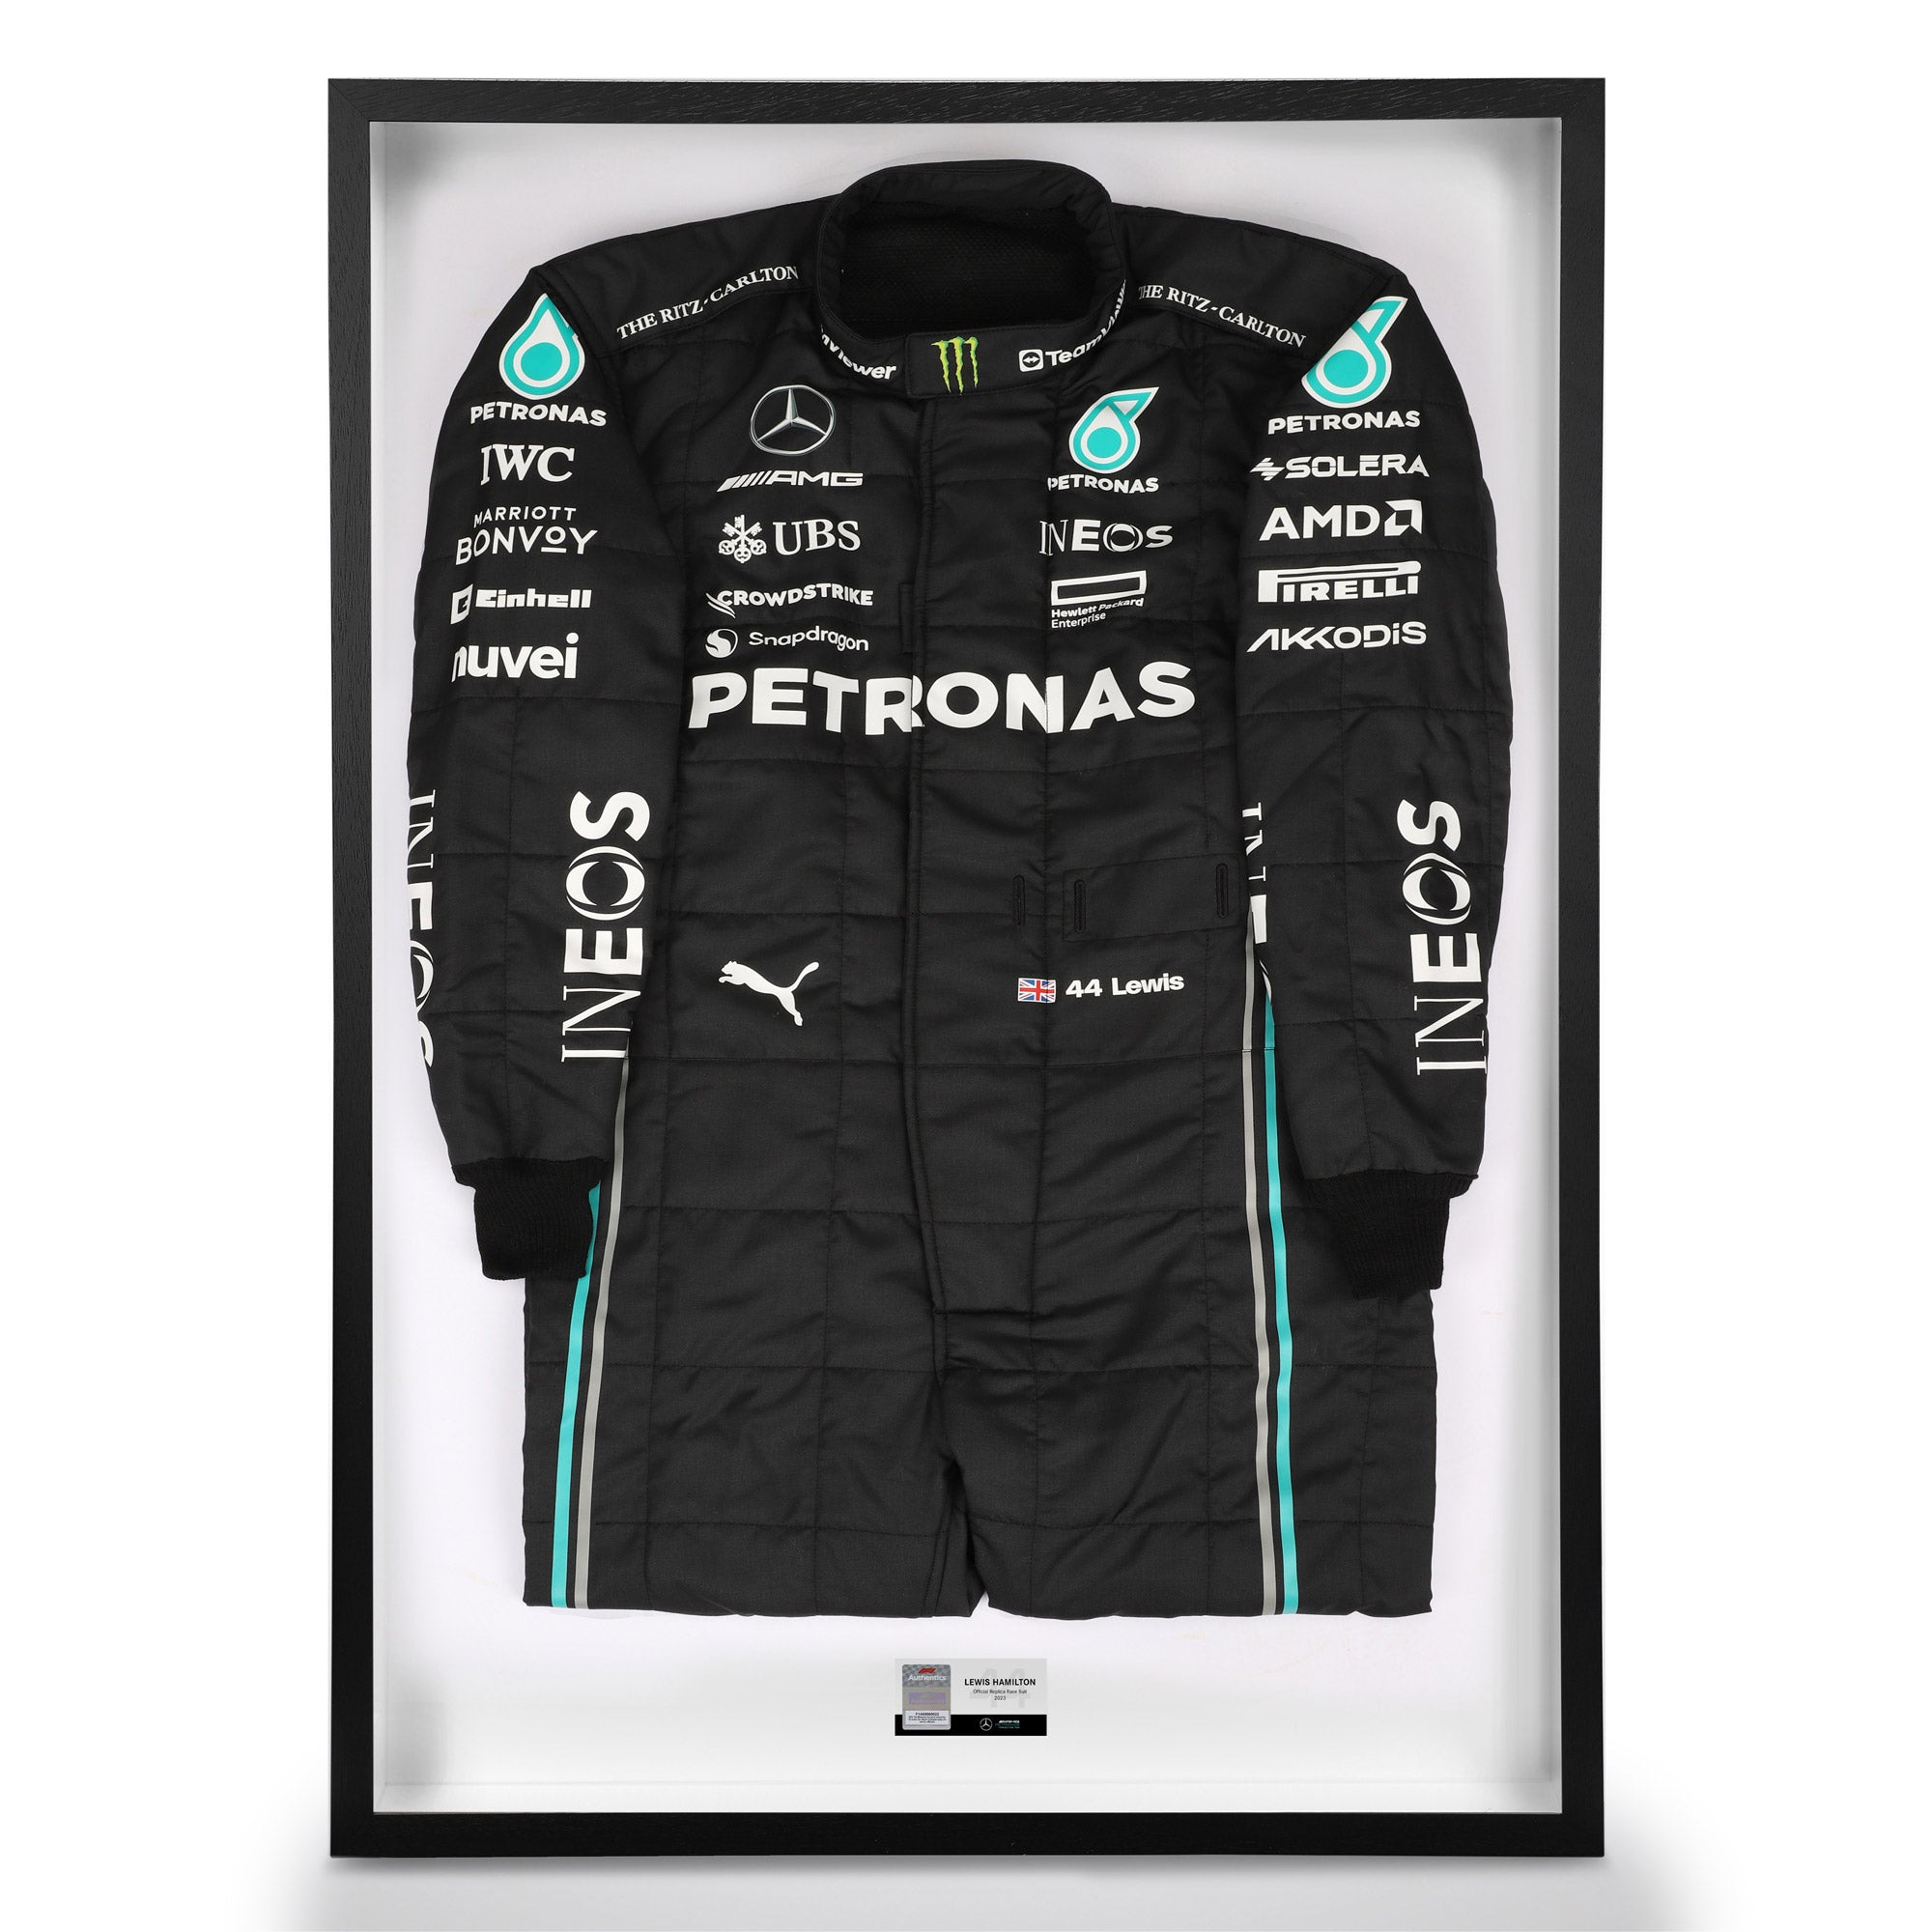 Officially Licensed 2023 Mercedes-AMG Petronas F1 Team Race Suit - Lewis Hamilton Edition